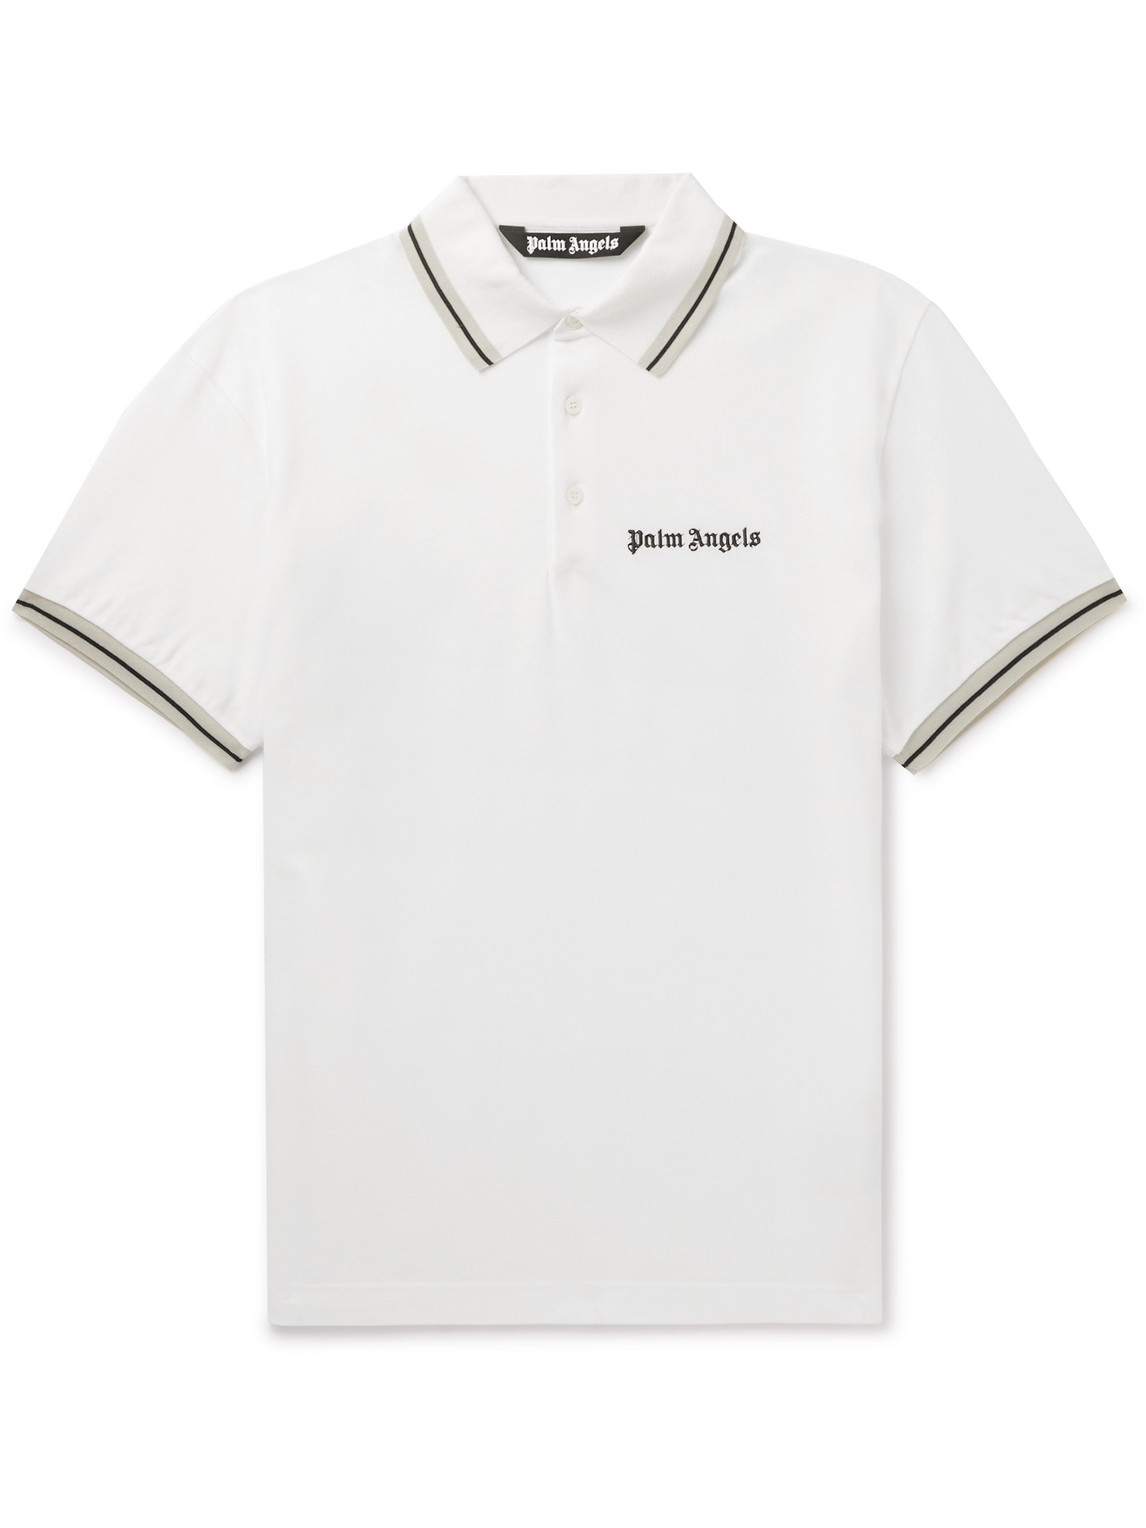 PALM ANGELS CONTRAST-TIPPED LOGO-EMBROIDERED COTTON-PIQUÉ POLO SHIRT